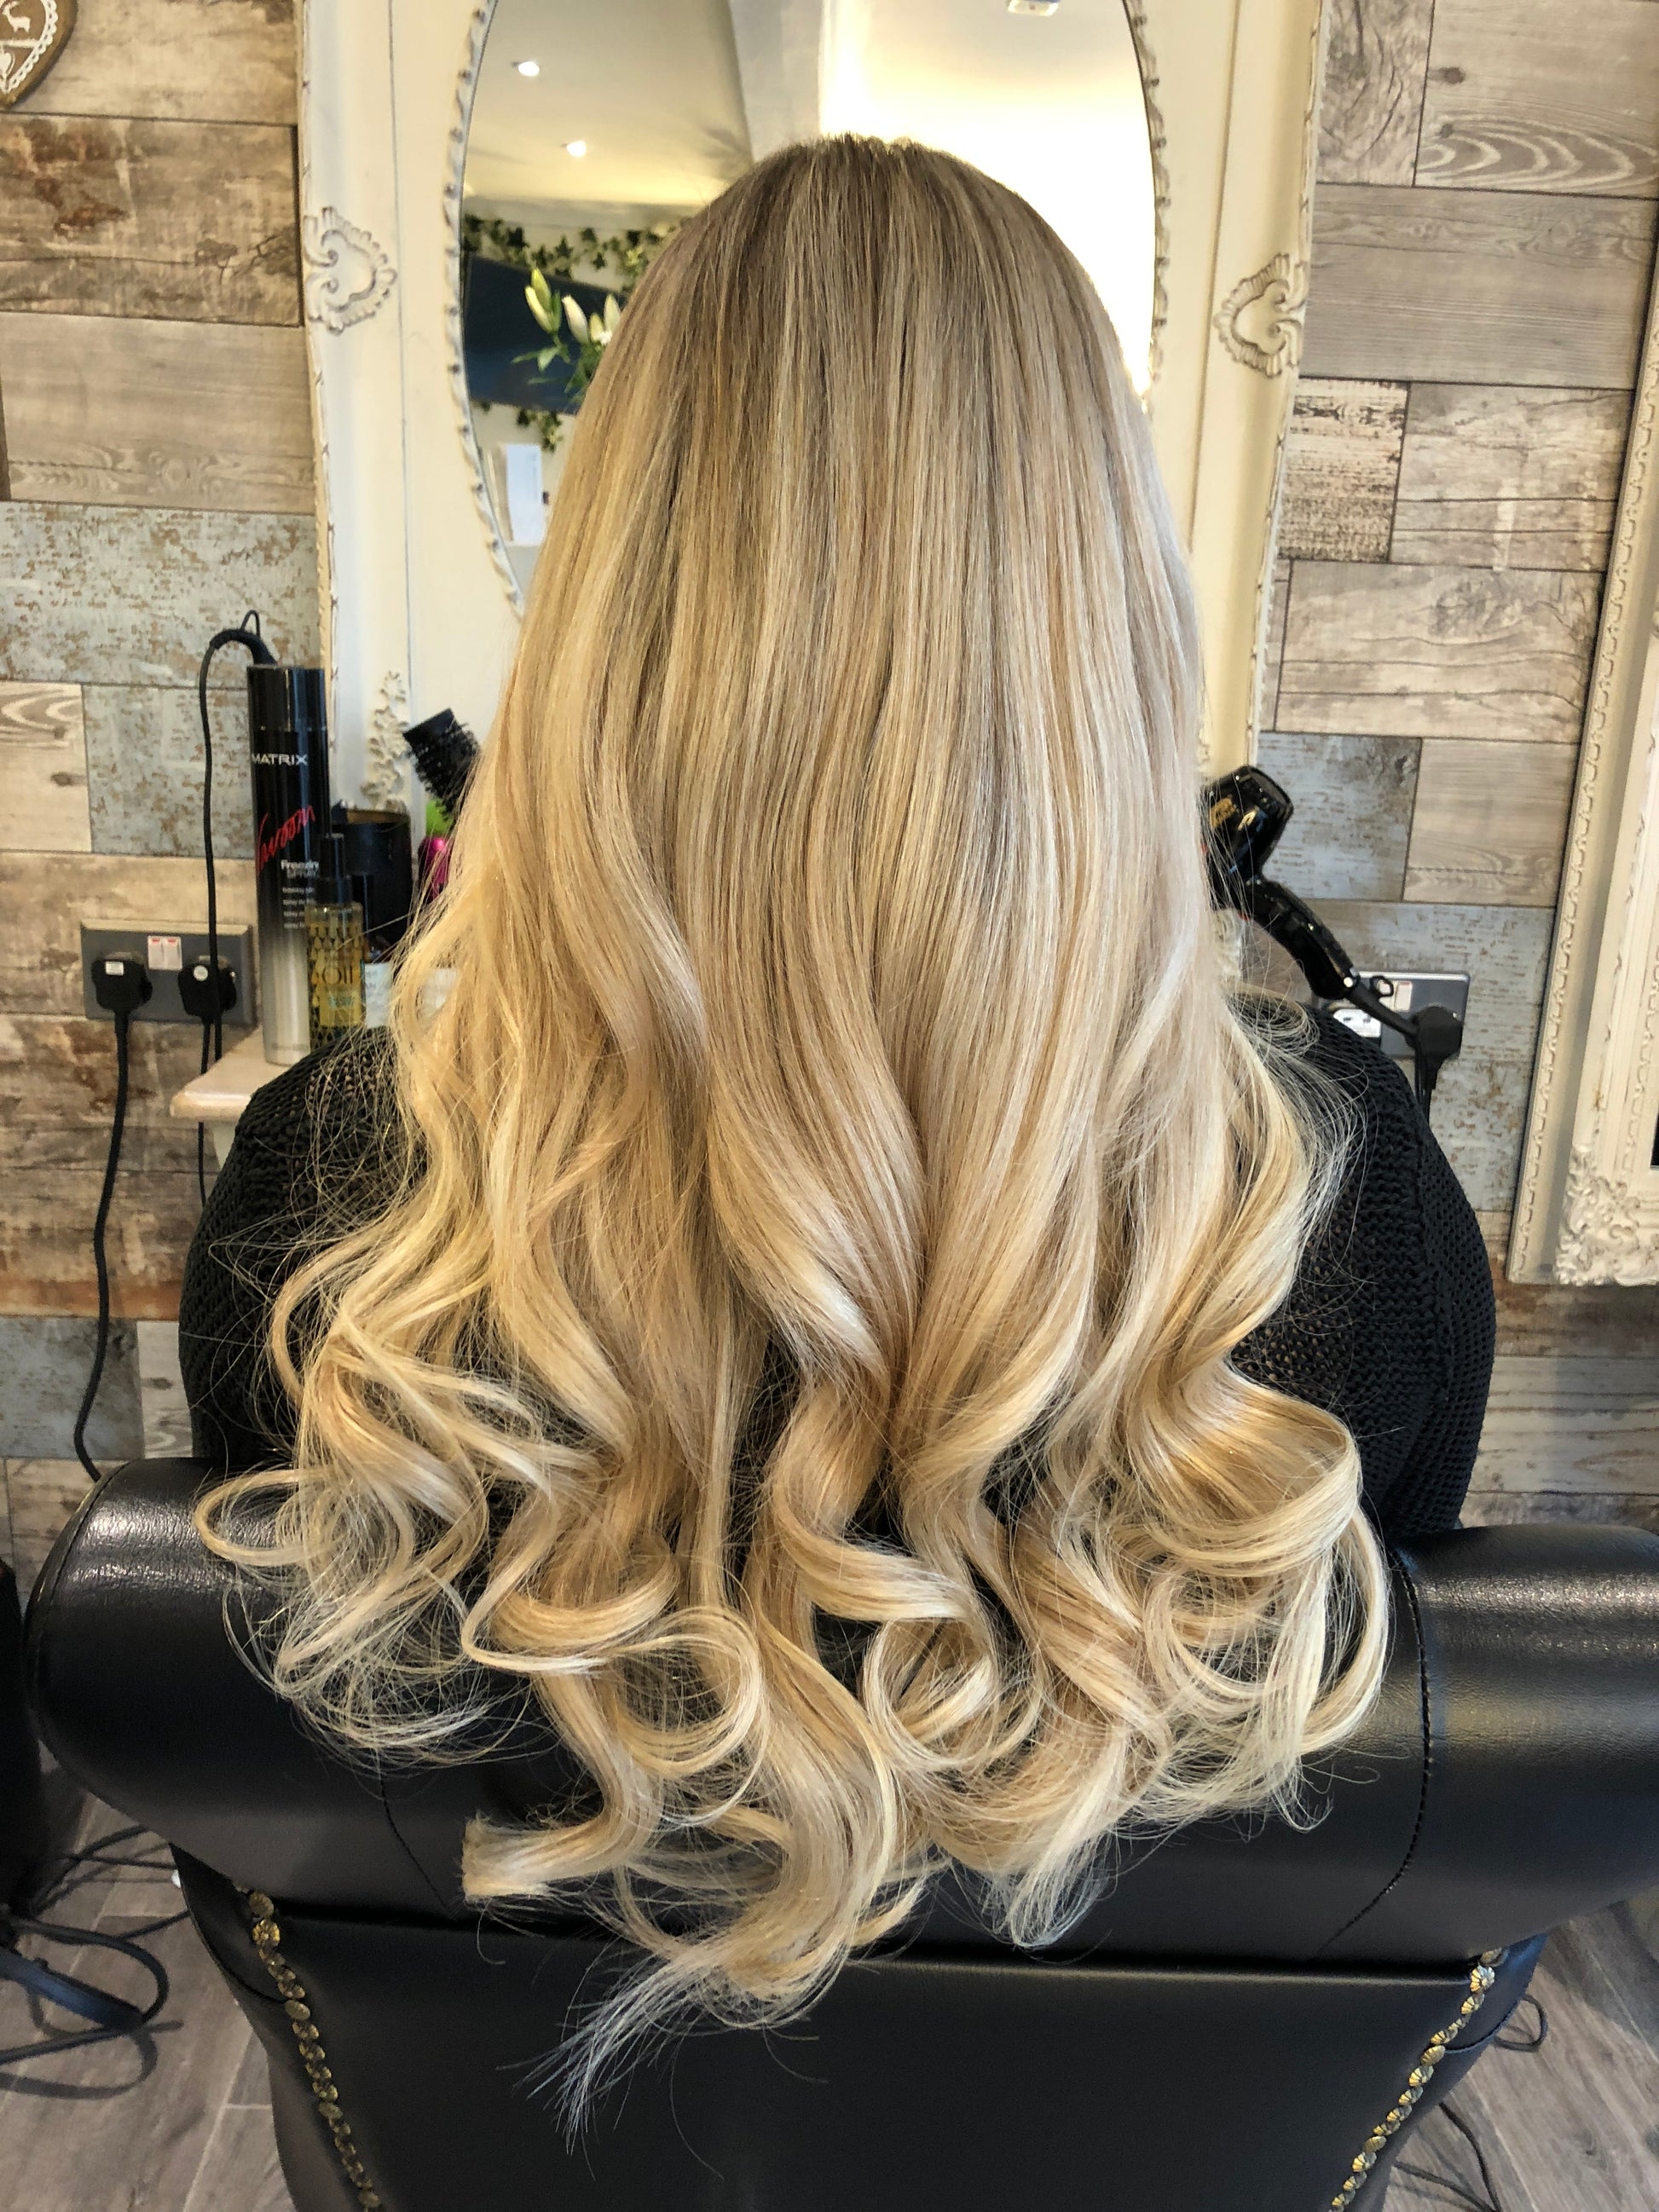 Micro & Nano Ring Hair Extensions Online Course - Advanced Techniques by Che Academy